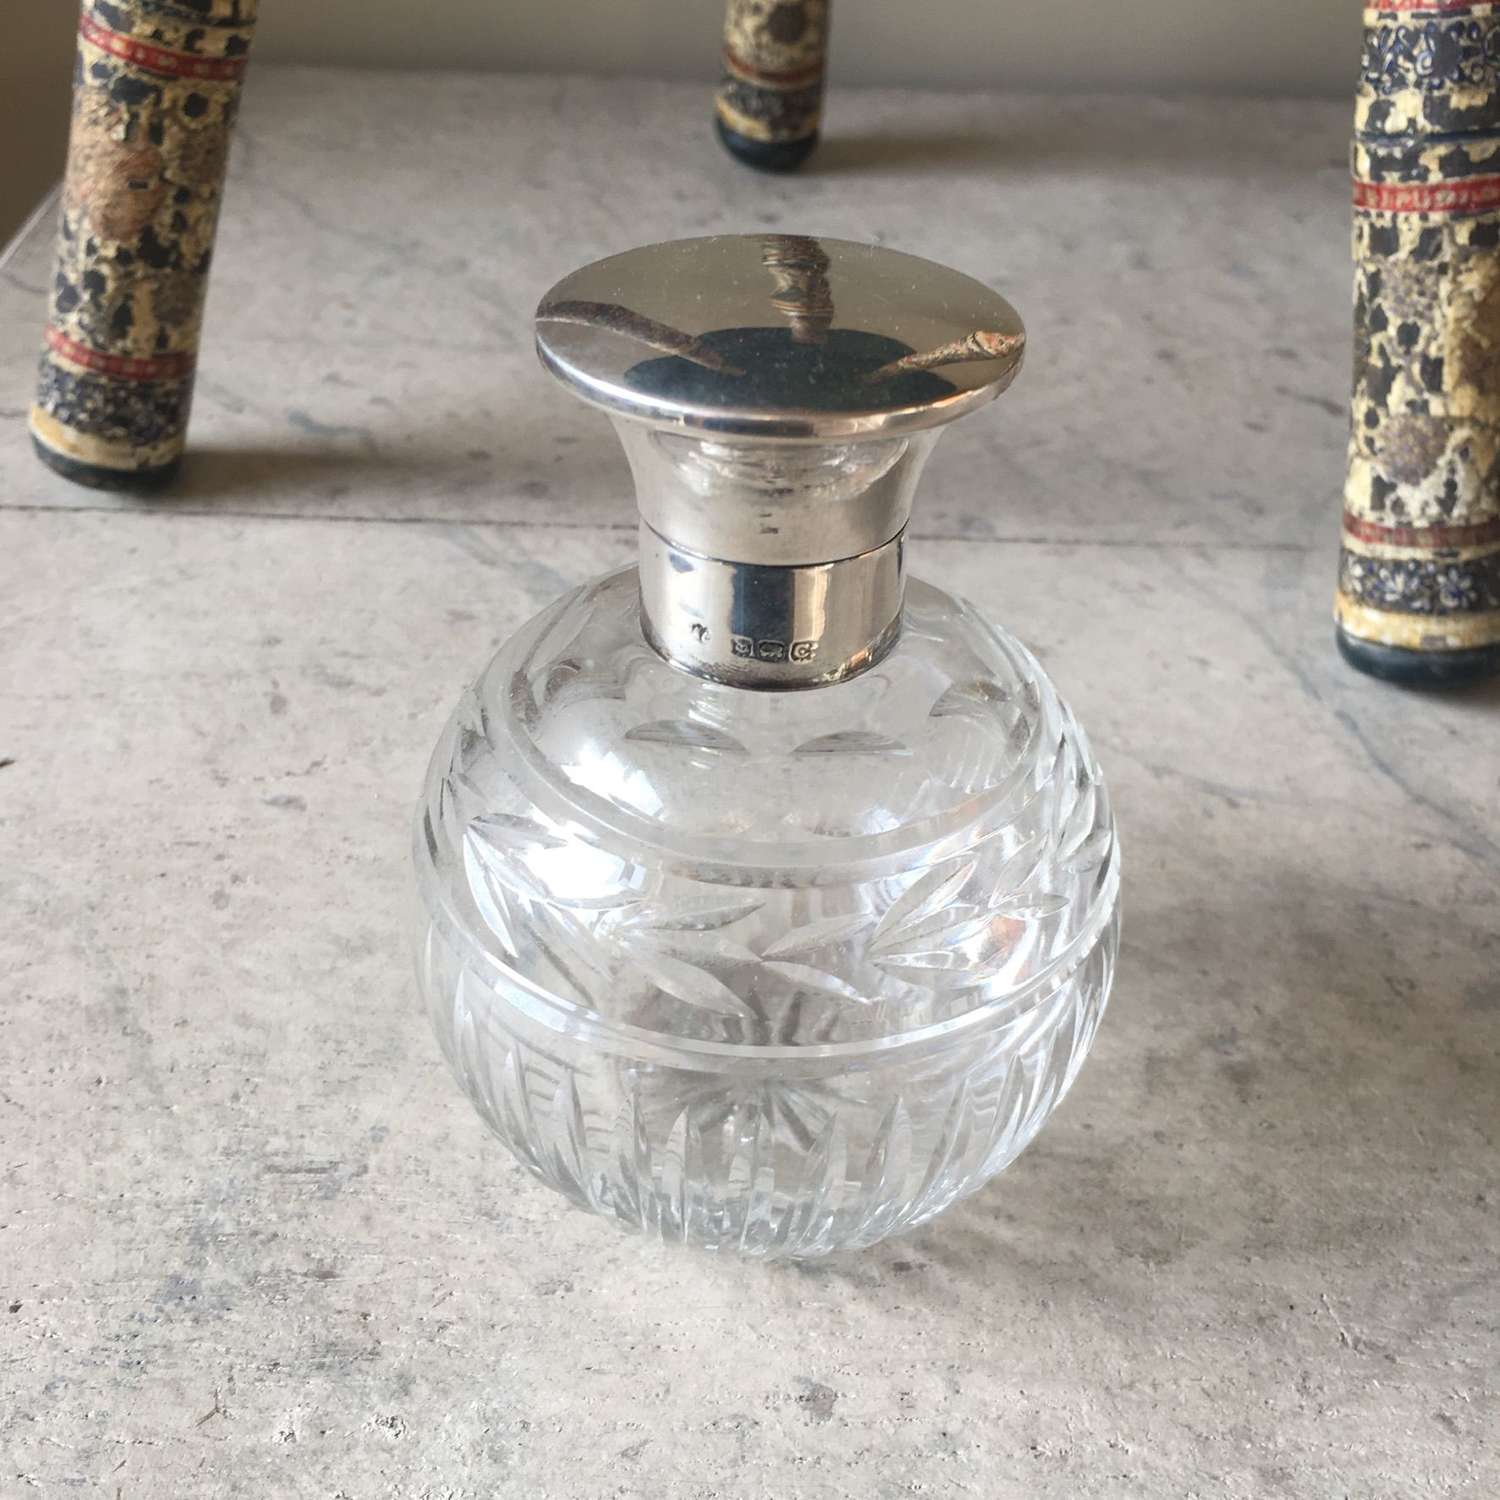 H/M 1927 silver topped crystal glass scent bottle